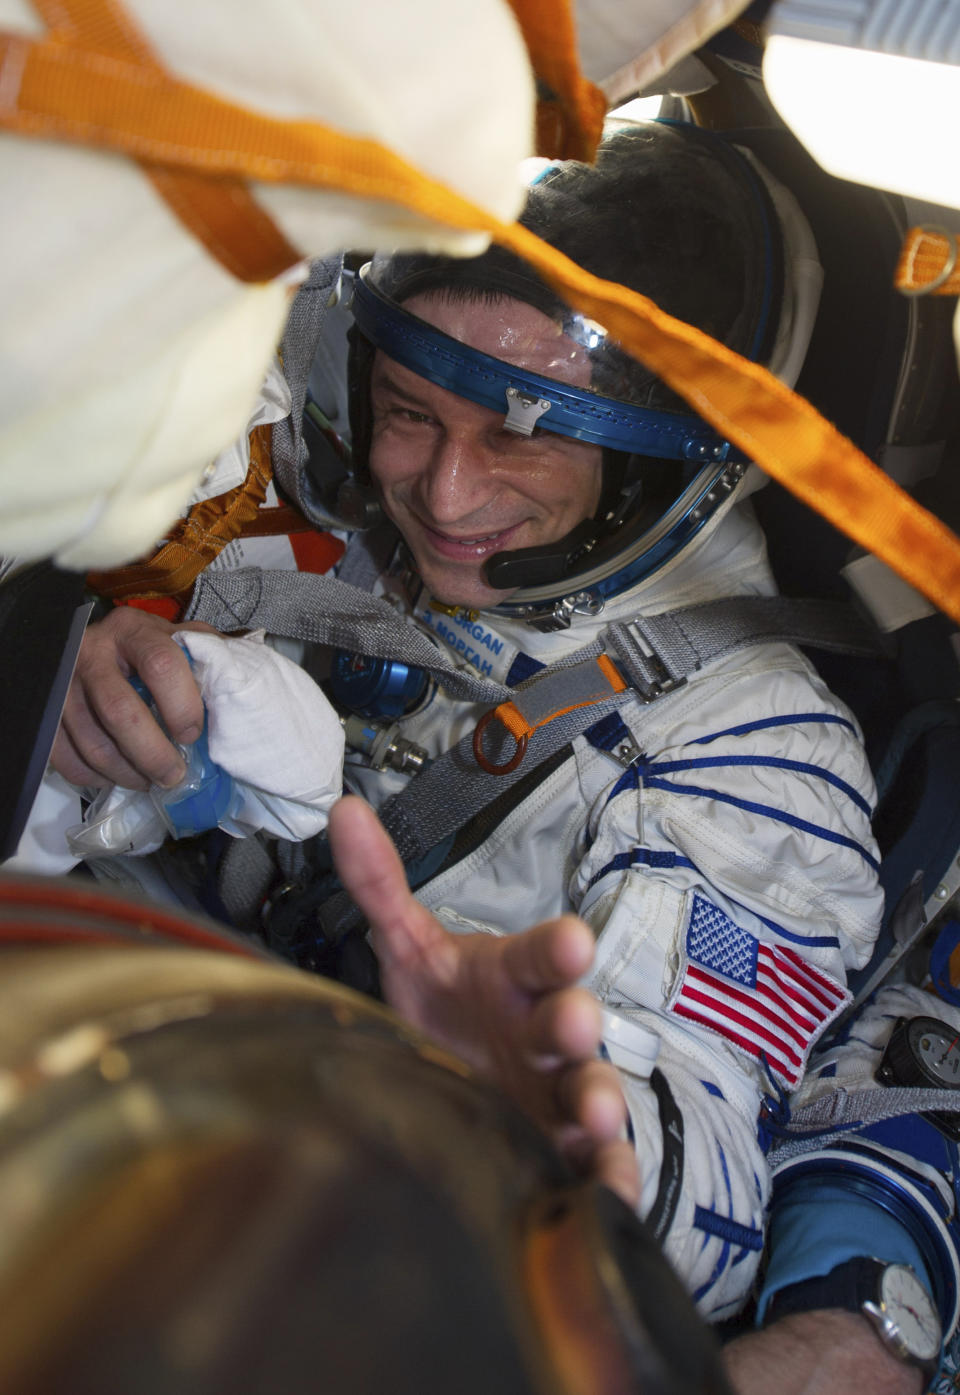 In this handout photo released by Gagarin Cosmonaut Training Centre (GCTC), Roscosmos space agency, U.S. astronaut Andrew Morgan sits in the capsule shortly after the landing of the Russian Soyuz MS-15 space capsule near Kazakh town of Dzhezkazgan, Kazakhstan, Friday, April 17, 2020. An International Space Station crew has landed safely after more than 200 days in space. The Soyuz capsule carrying NASA astronauts Andrew Morgan, Jessica Meir and Russian space agency Roscosmos' Oleg Skripochka touched down on Friday on the steppes of Kazakhstan. (Andrey Shelepin, Gagarin Cosmonaut Training Centre (GCTC), Roscosmos space agency, via AP)